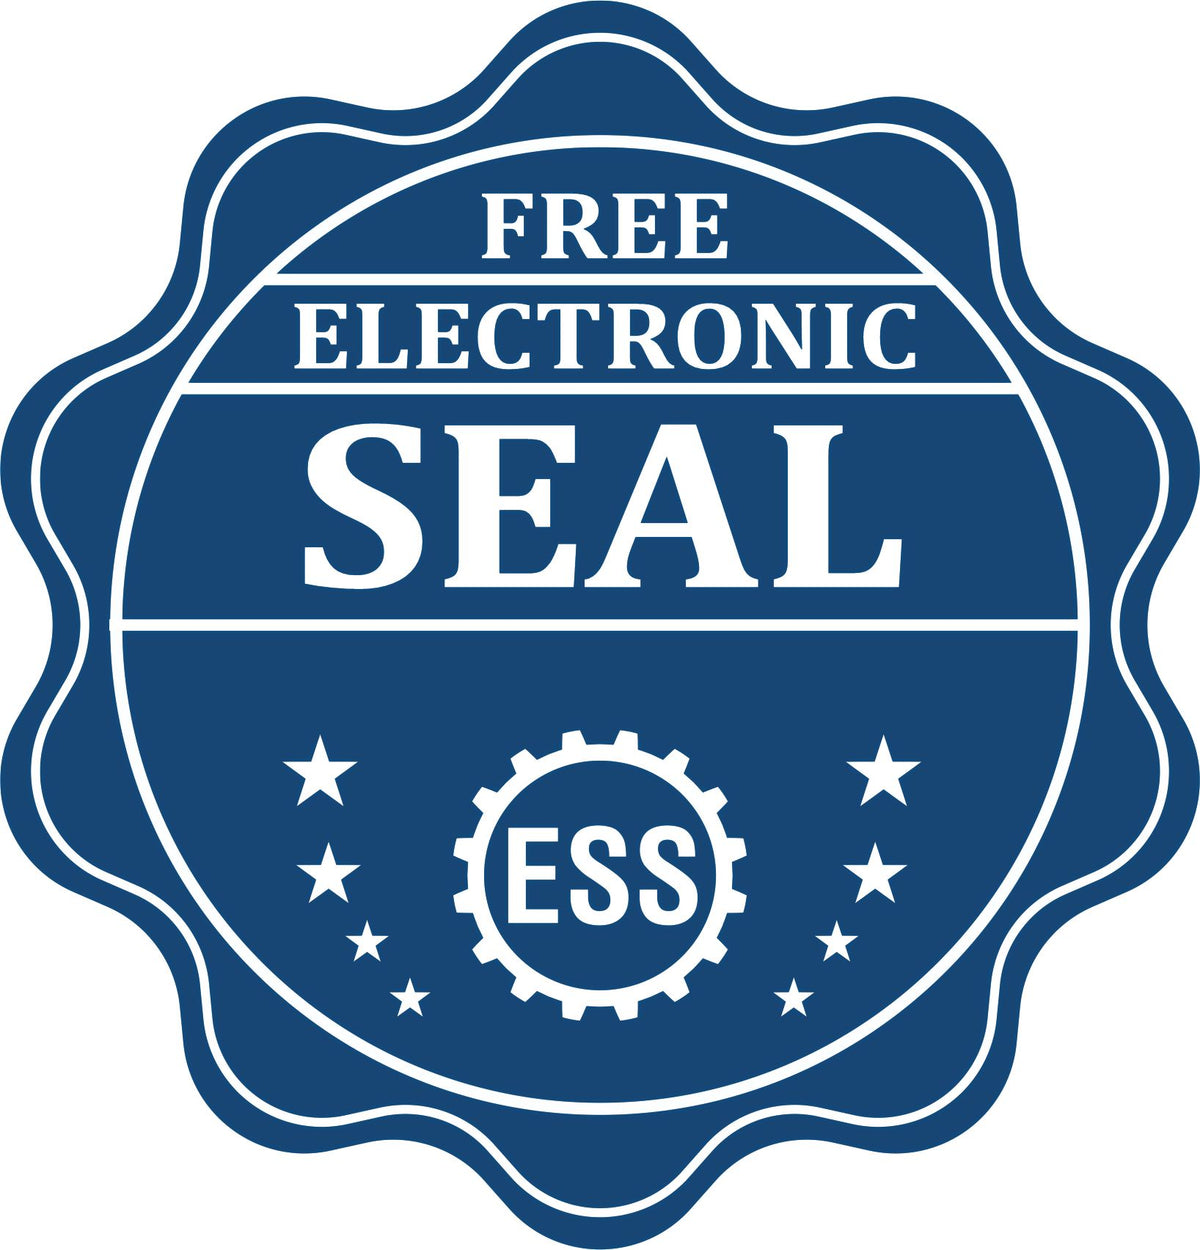 A badge showing a free electronic seal for the State of Iowa Extended Long Reach Geologist Seal with stars and the ESS gear on the emblem.